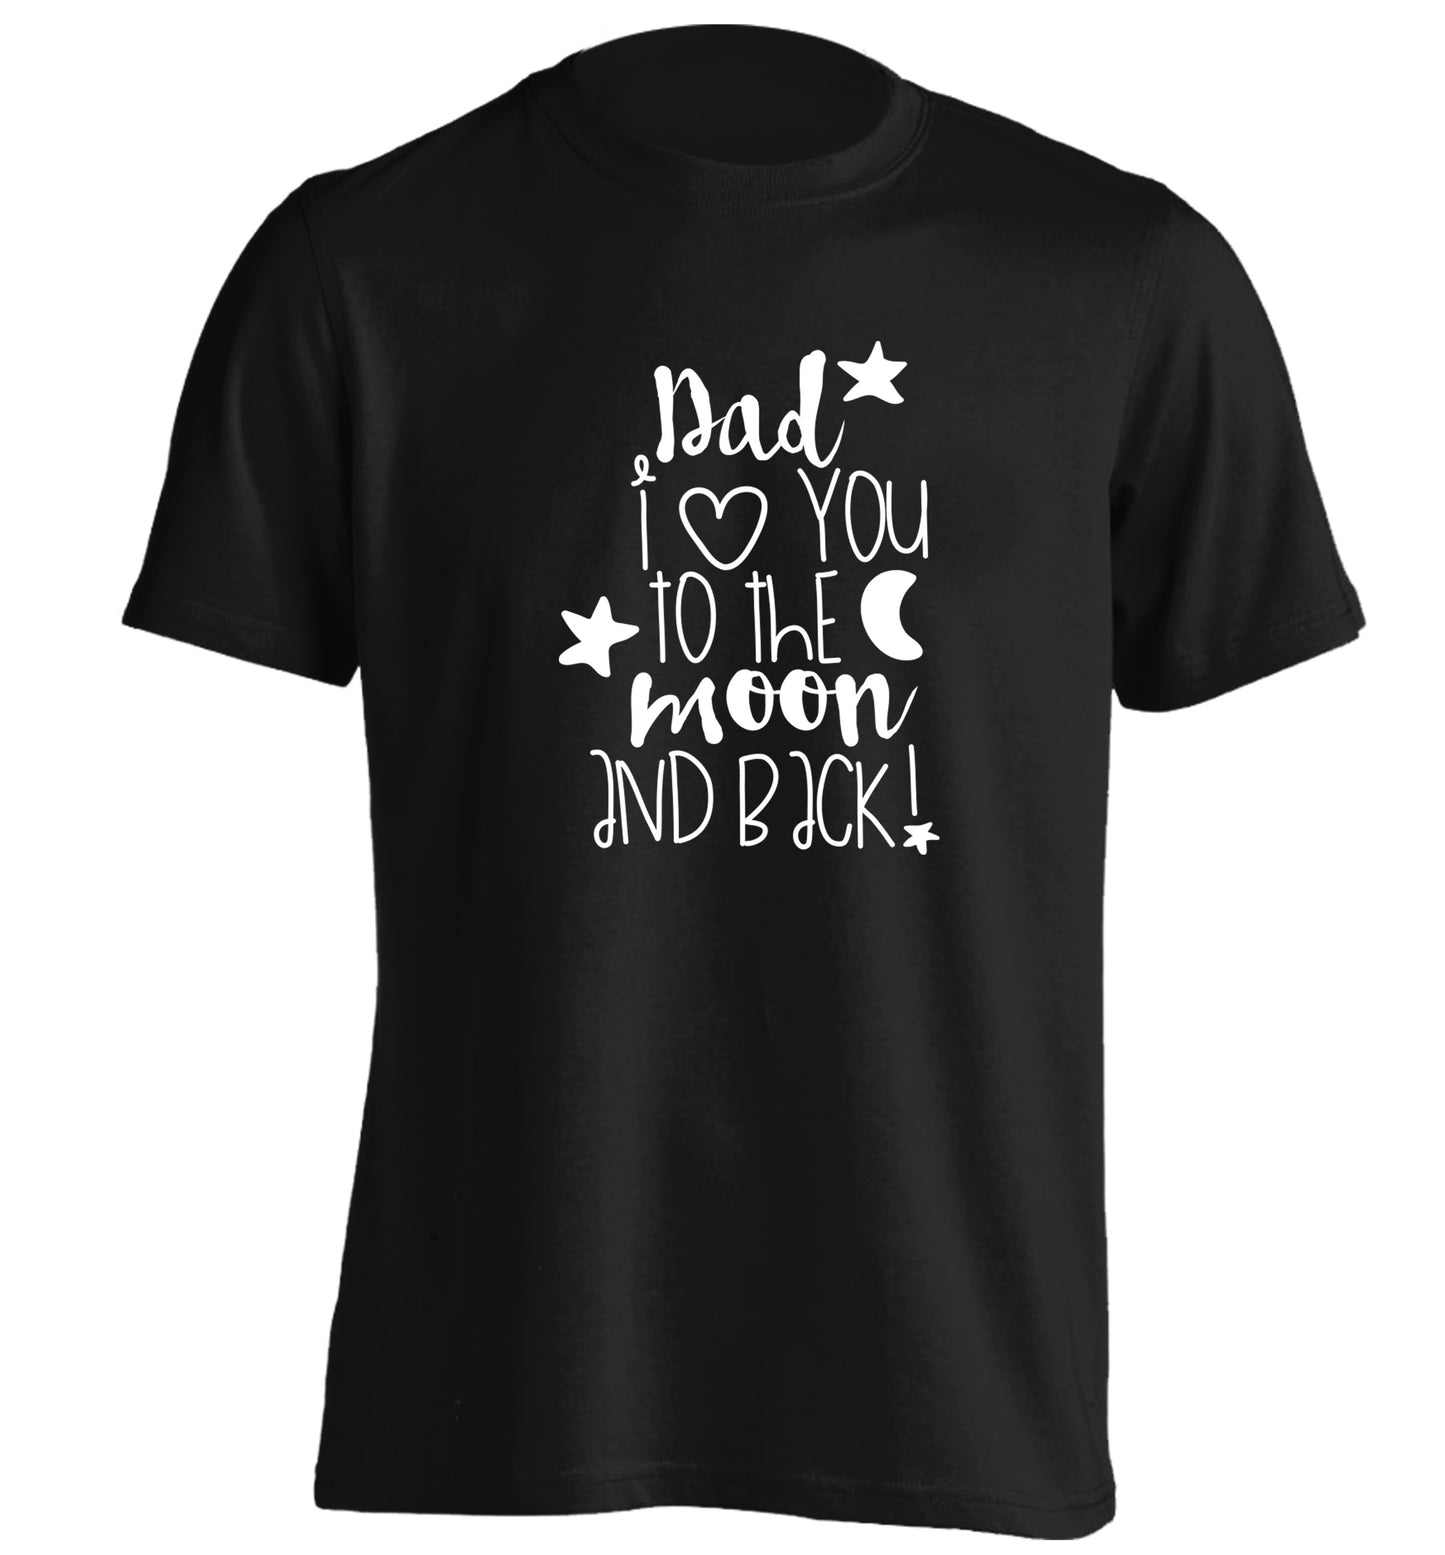 Dad I love you to the moon and back adults unisex black Tshirt 2XL